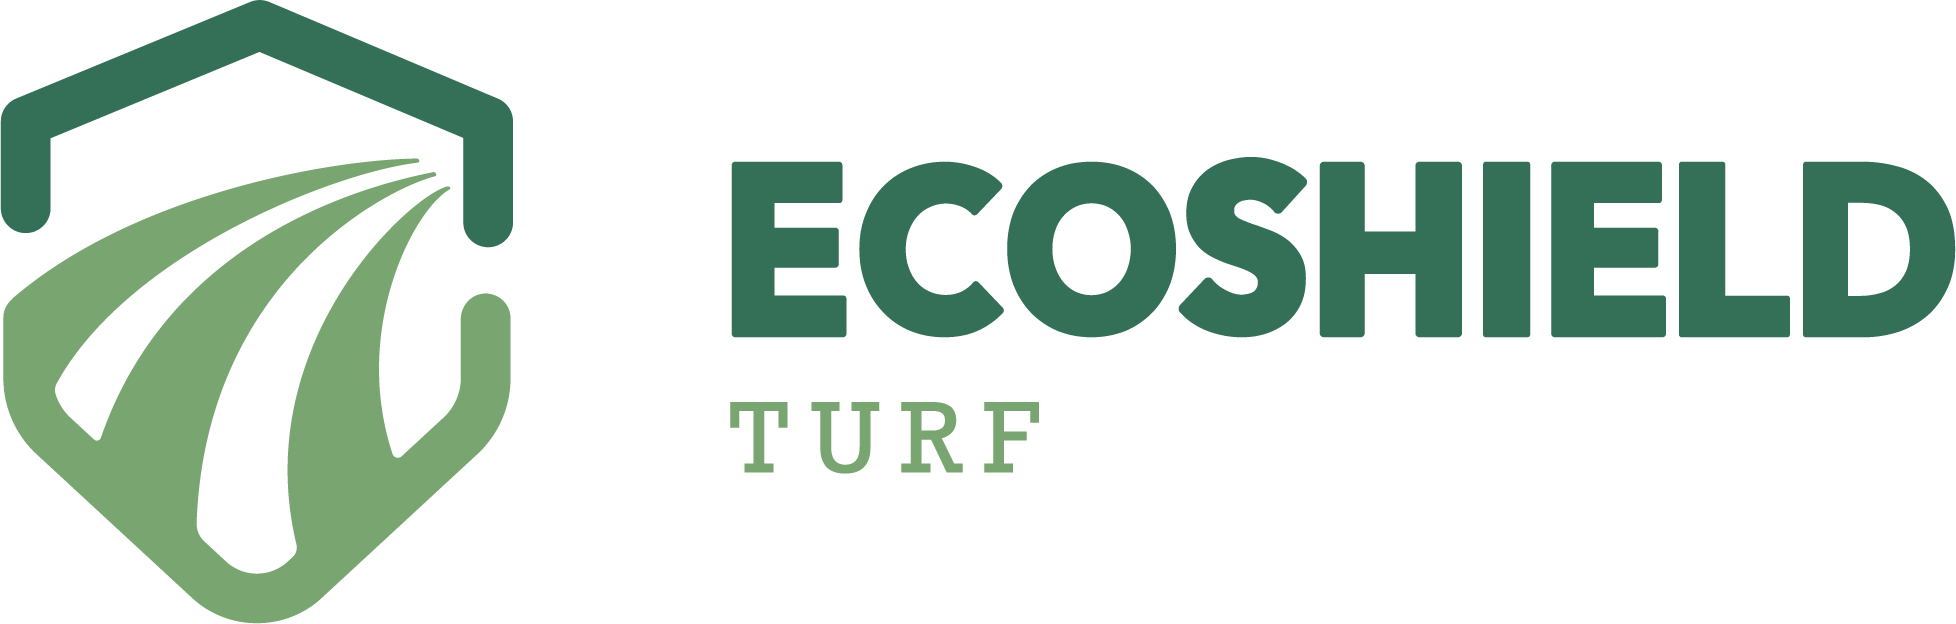 EcoShield Turf | Artificial Turf Supplier and Installer